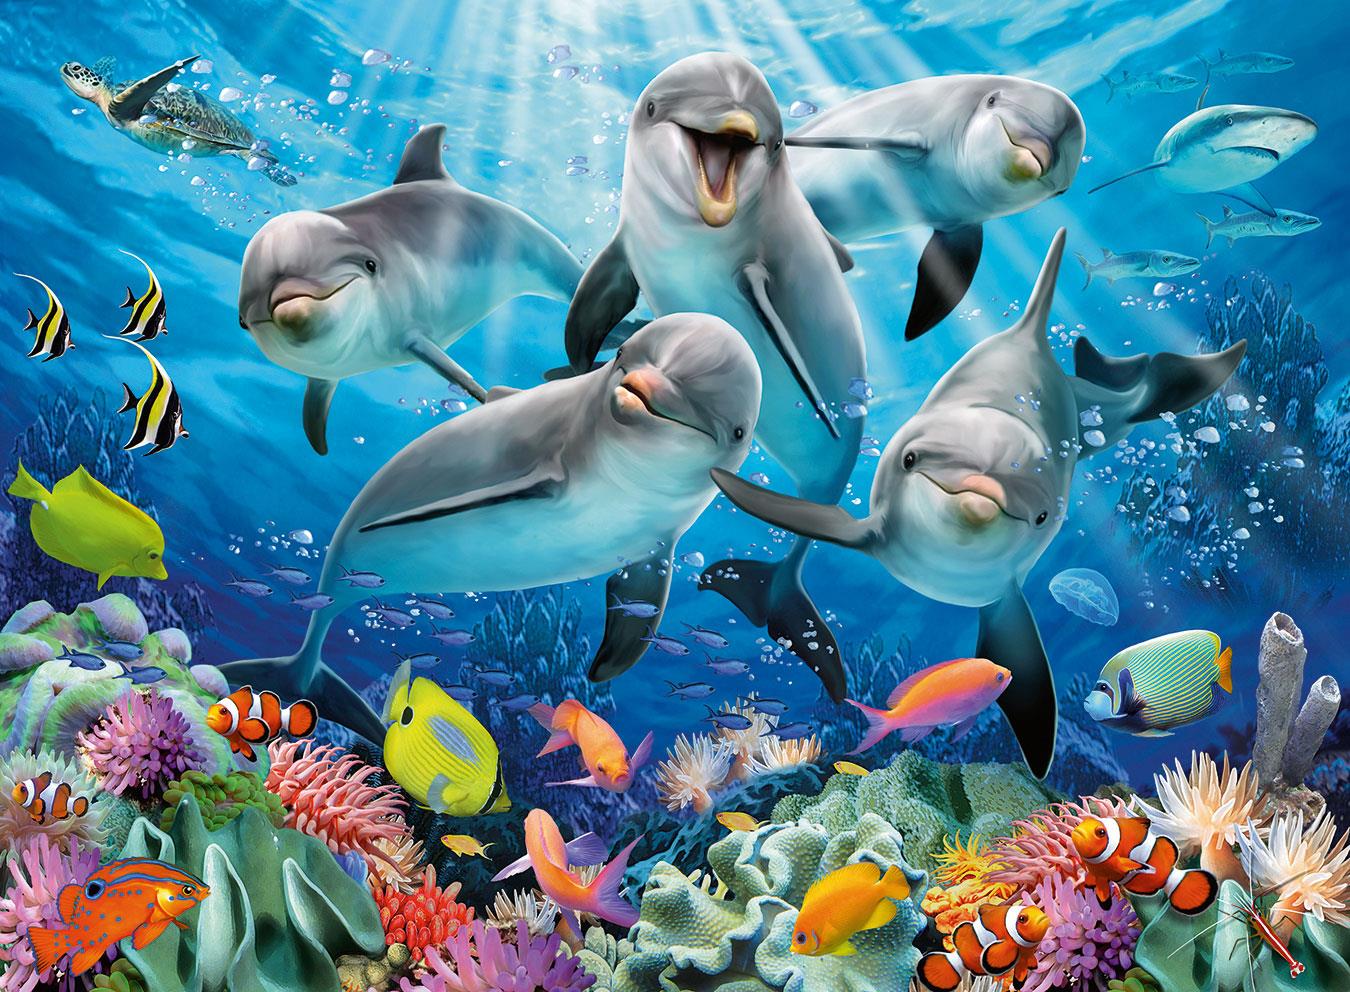 Ravensburger Dolphins Jigsaw Puzzle (500 Pieces)